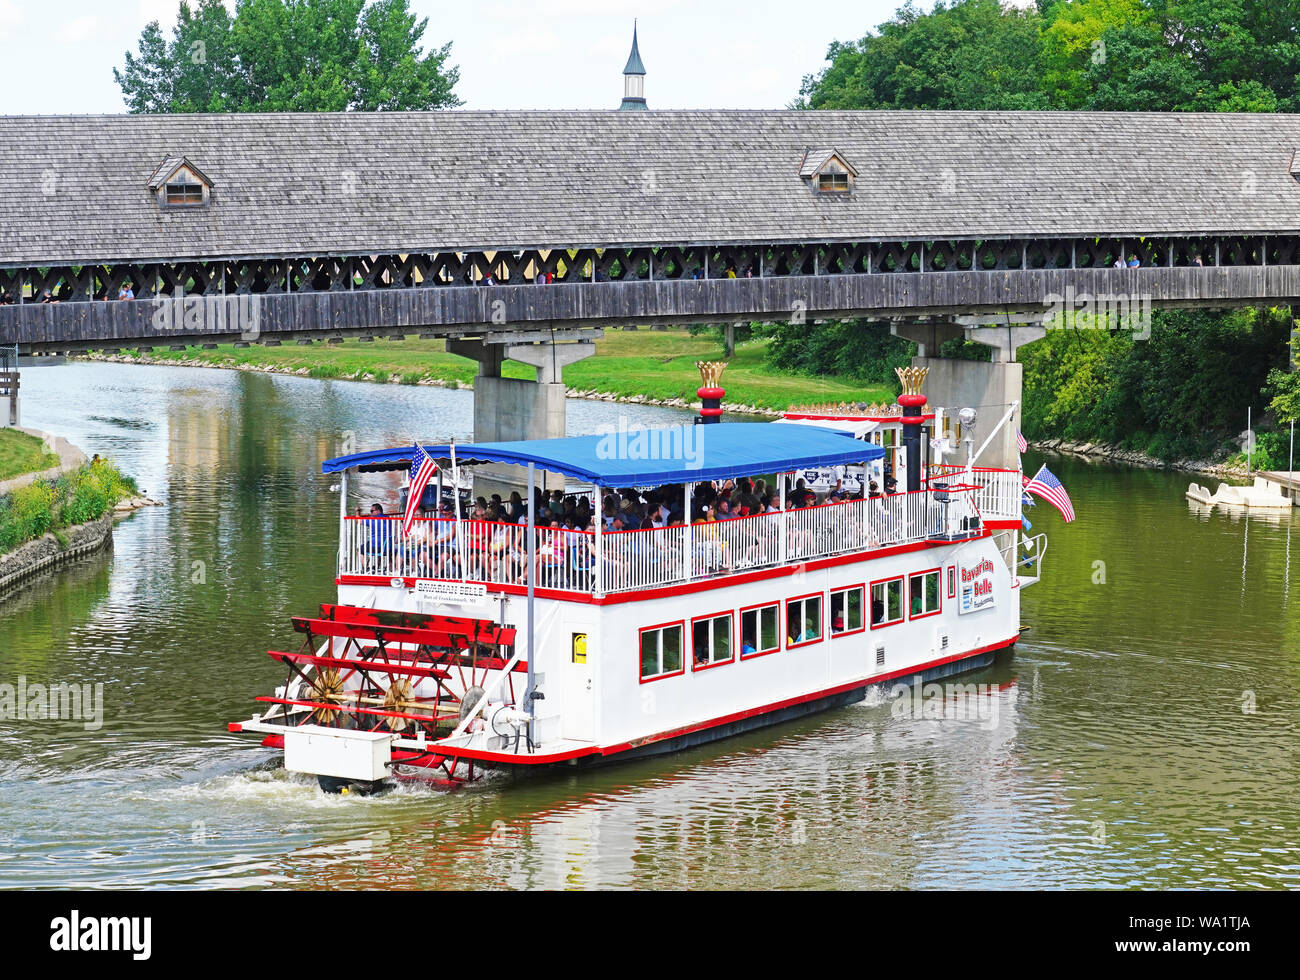 Bavarian Belle Riverboat on sightseeing cruise of Cass River at the Frankenmuth wooden covered bridge. Stock Photo